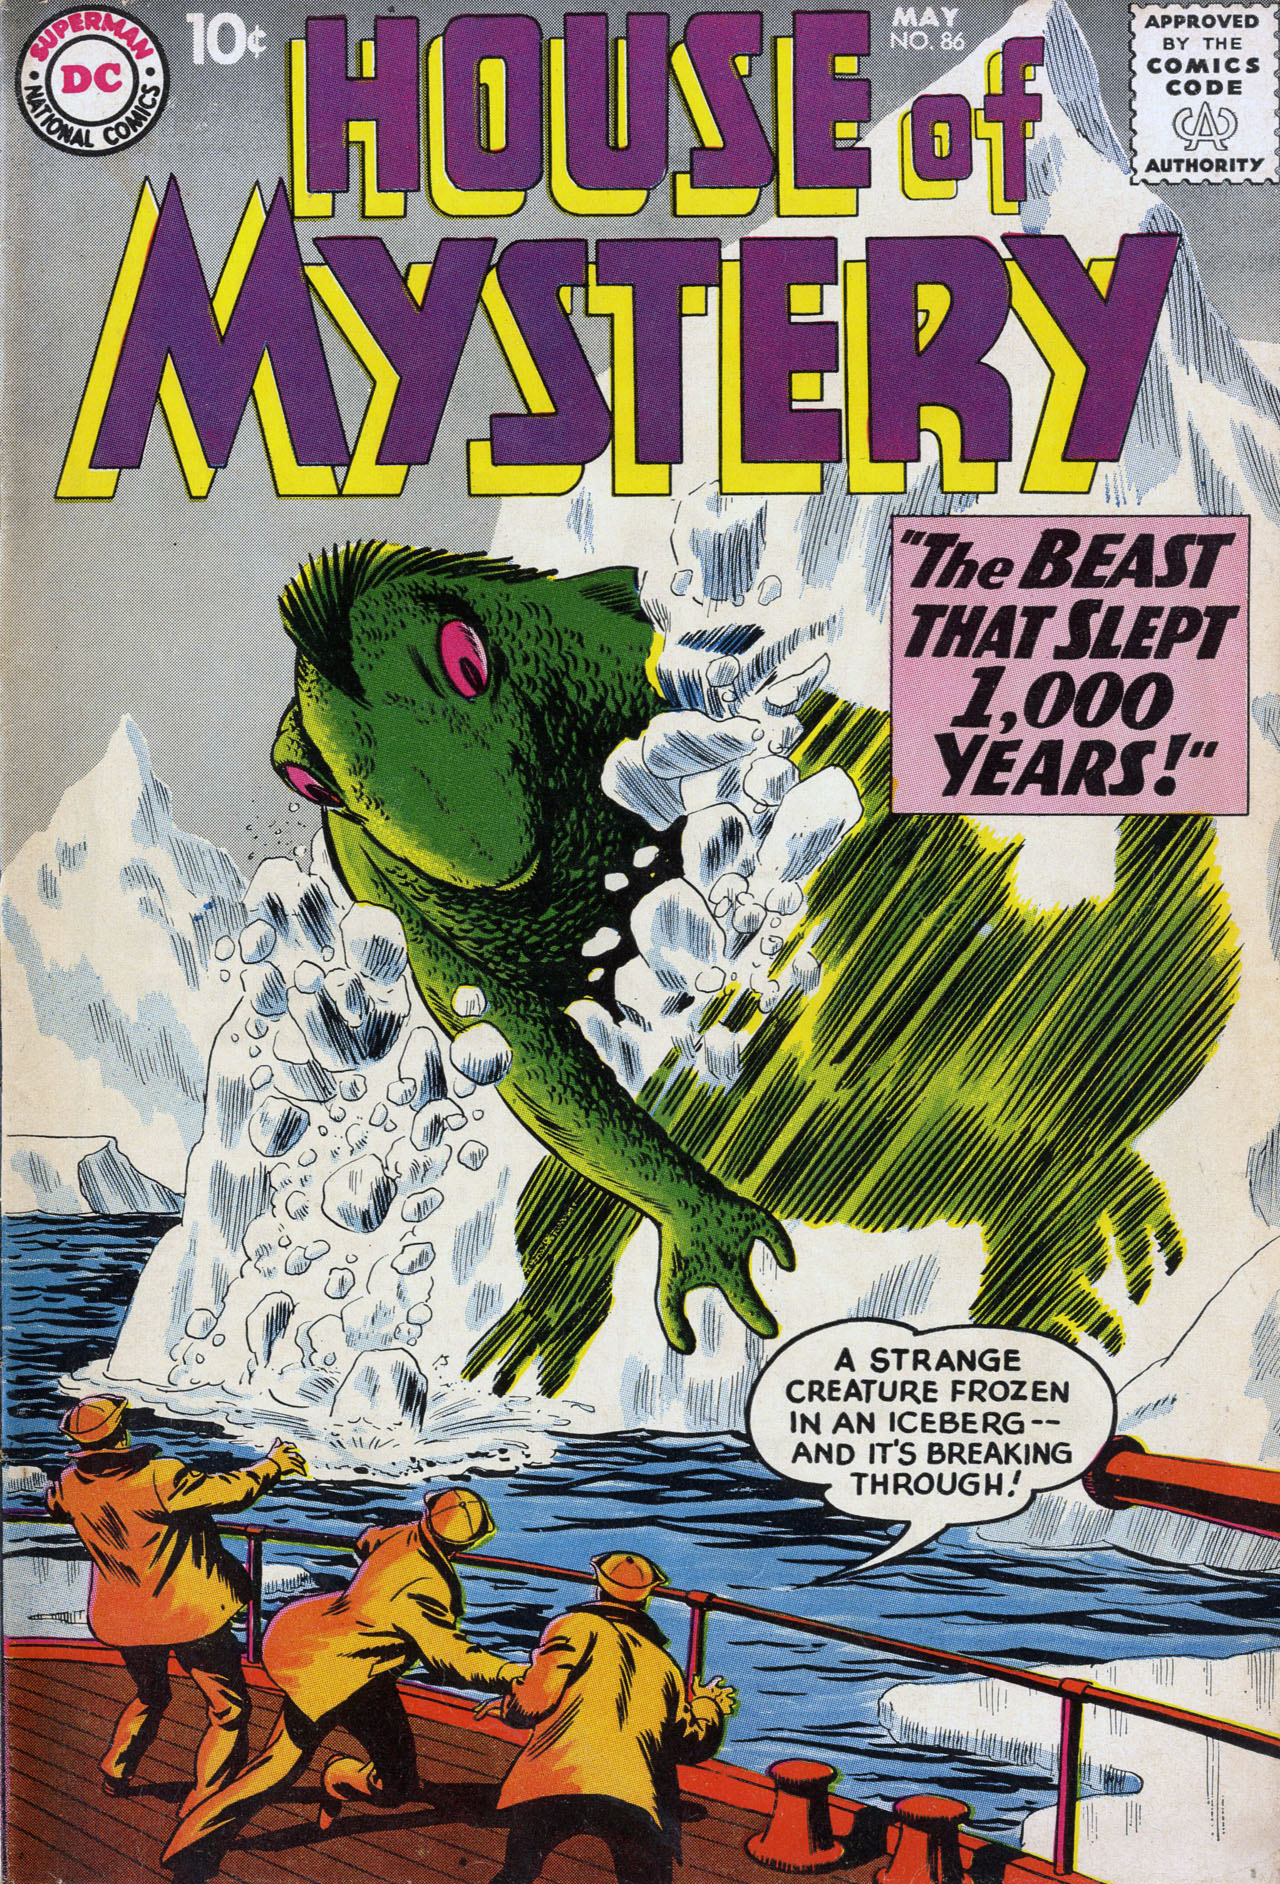 Read online House of Mystery (1951) comic -  Issue #86 - 1